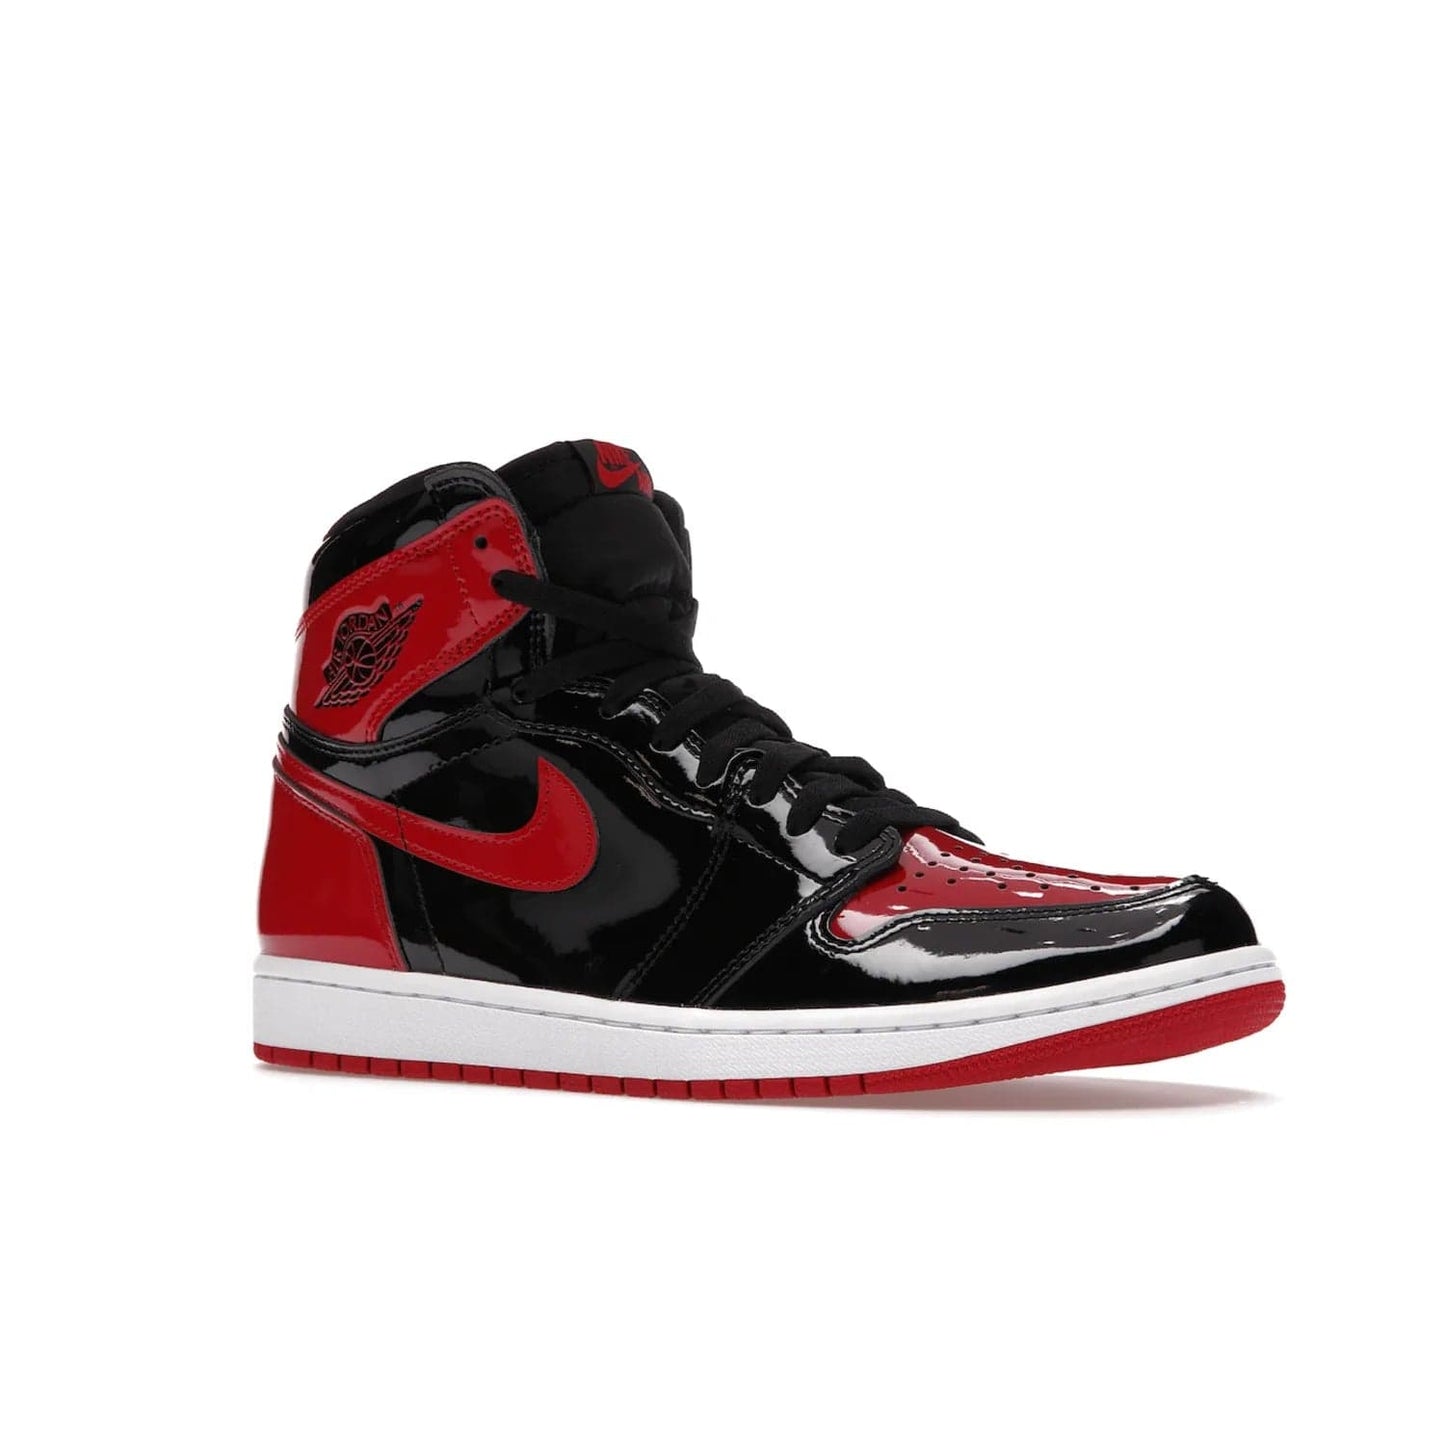 Jordan 1 Retro High OG Patent Bred - Image 4 - Only at www.BallersClubKickz.com - Introducing Air Jordan 1 Retro High OG Patent Bred - sleek patent leather upper, signature weaved Nike Air tongue and classic Wings logo on collar. Red and white sole complete signature look. Releasing December 2021 - perfect retro edition for holidays.